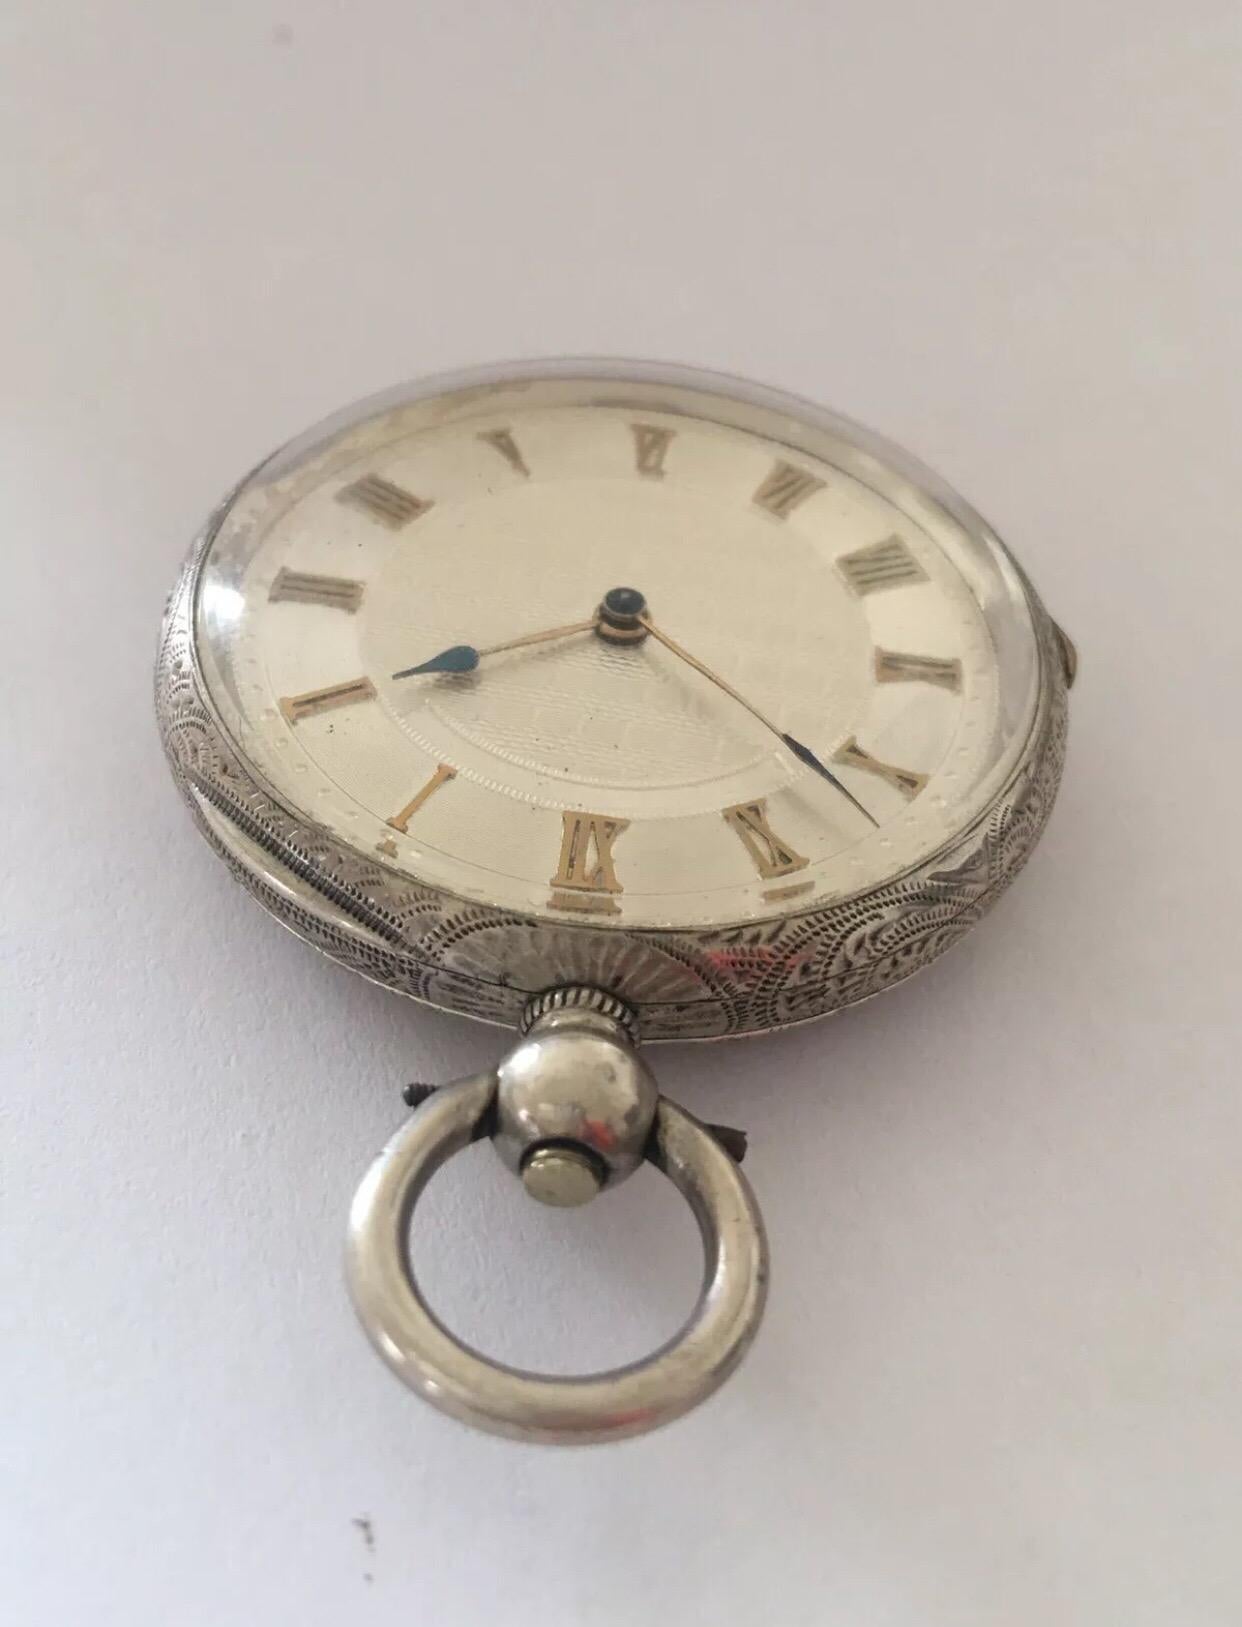 Small Antique Silver Key-Wind Pocket Watch Signed A. Bremer, Geneve, circa 1880s For Sale 1